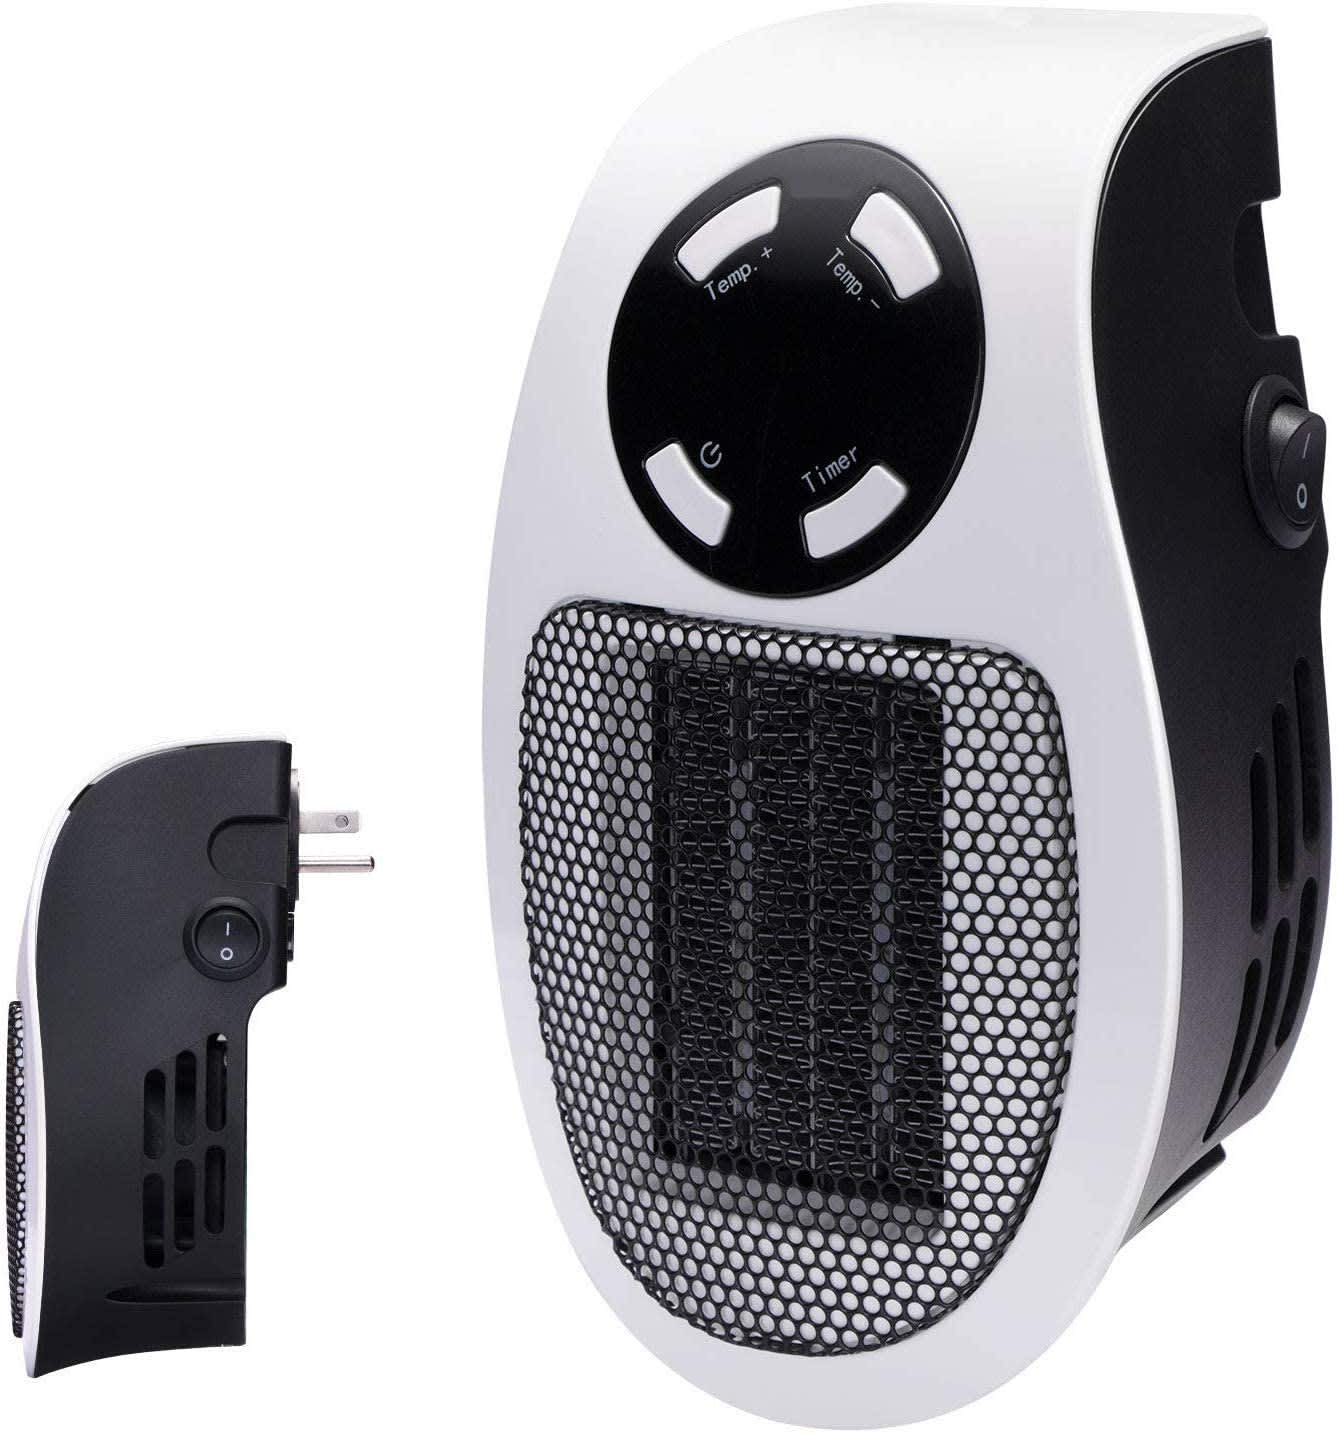 http://cdn.apartmenttherapy.info/image/upload/v1630689097/gen-workflow/product-database/plug_in_space_heater.jpg